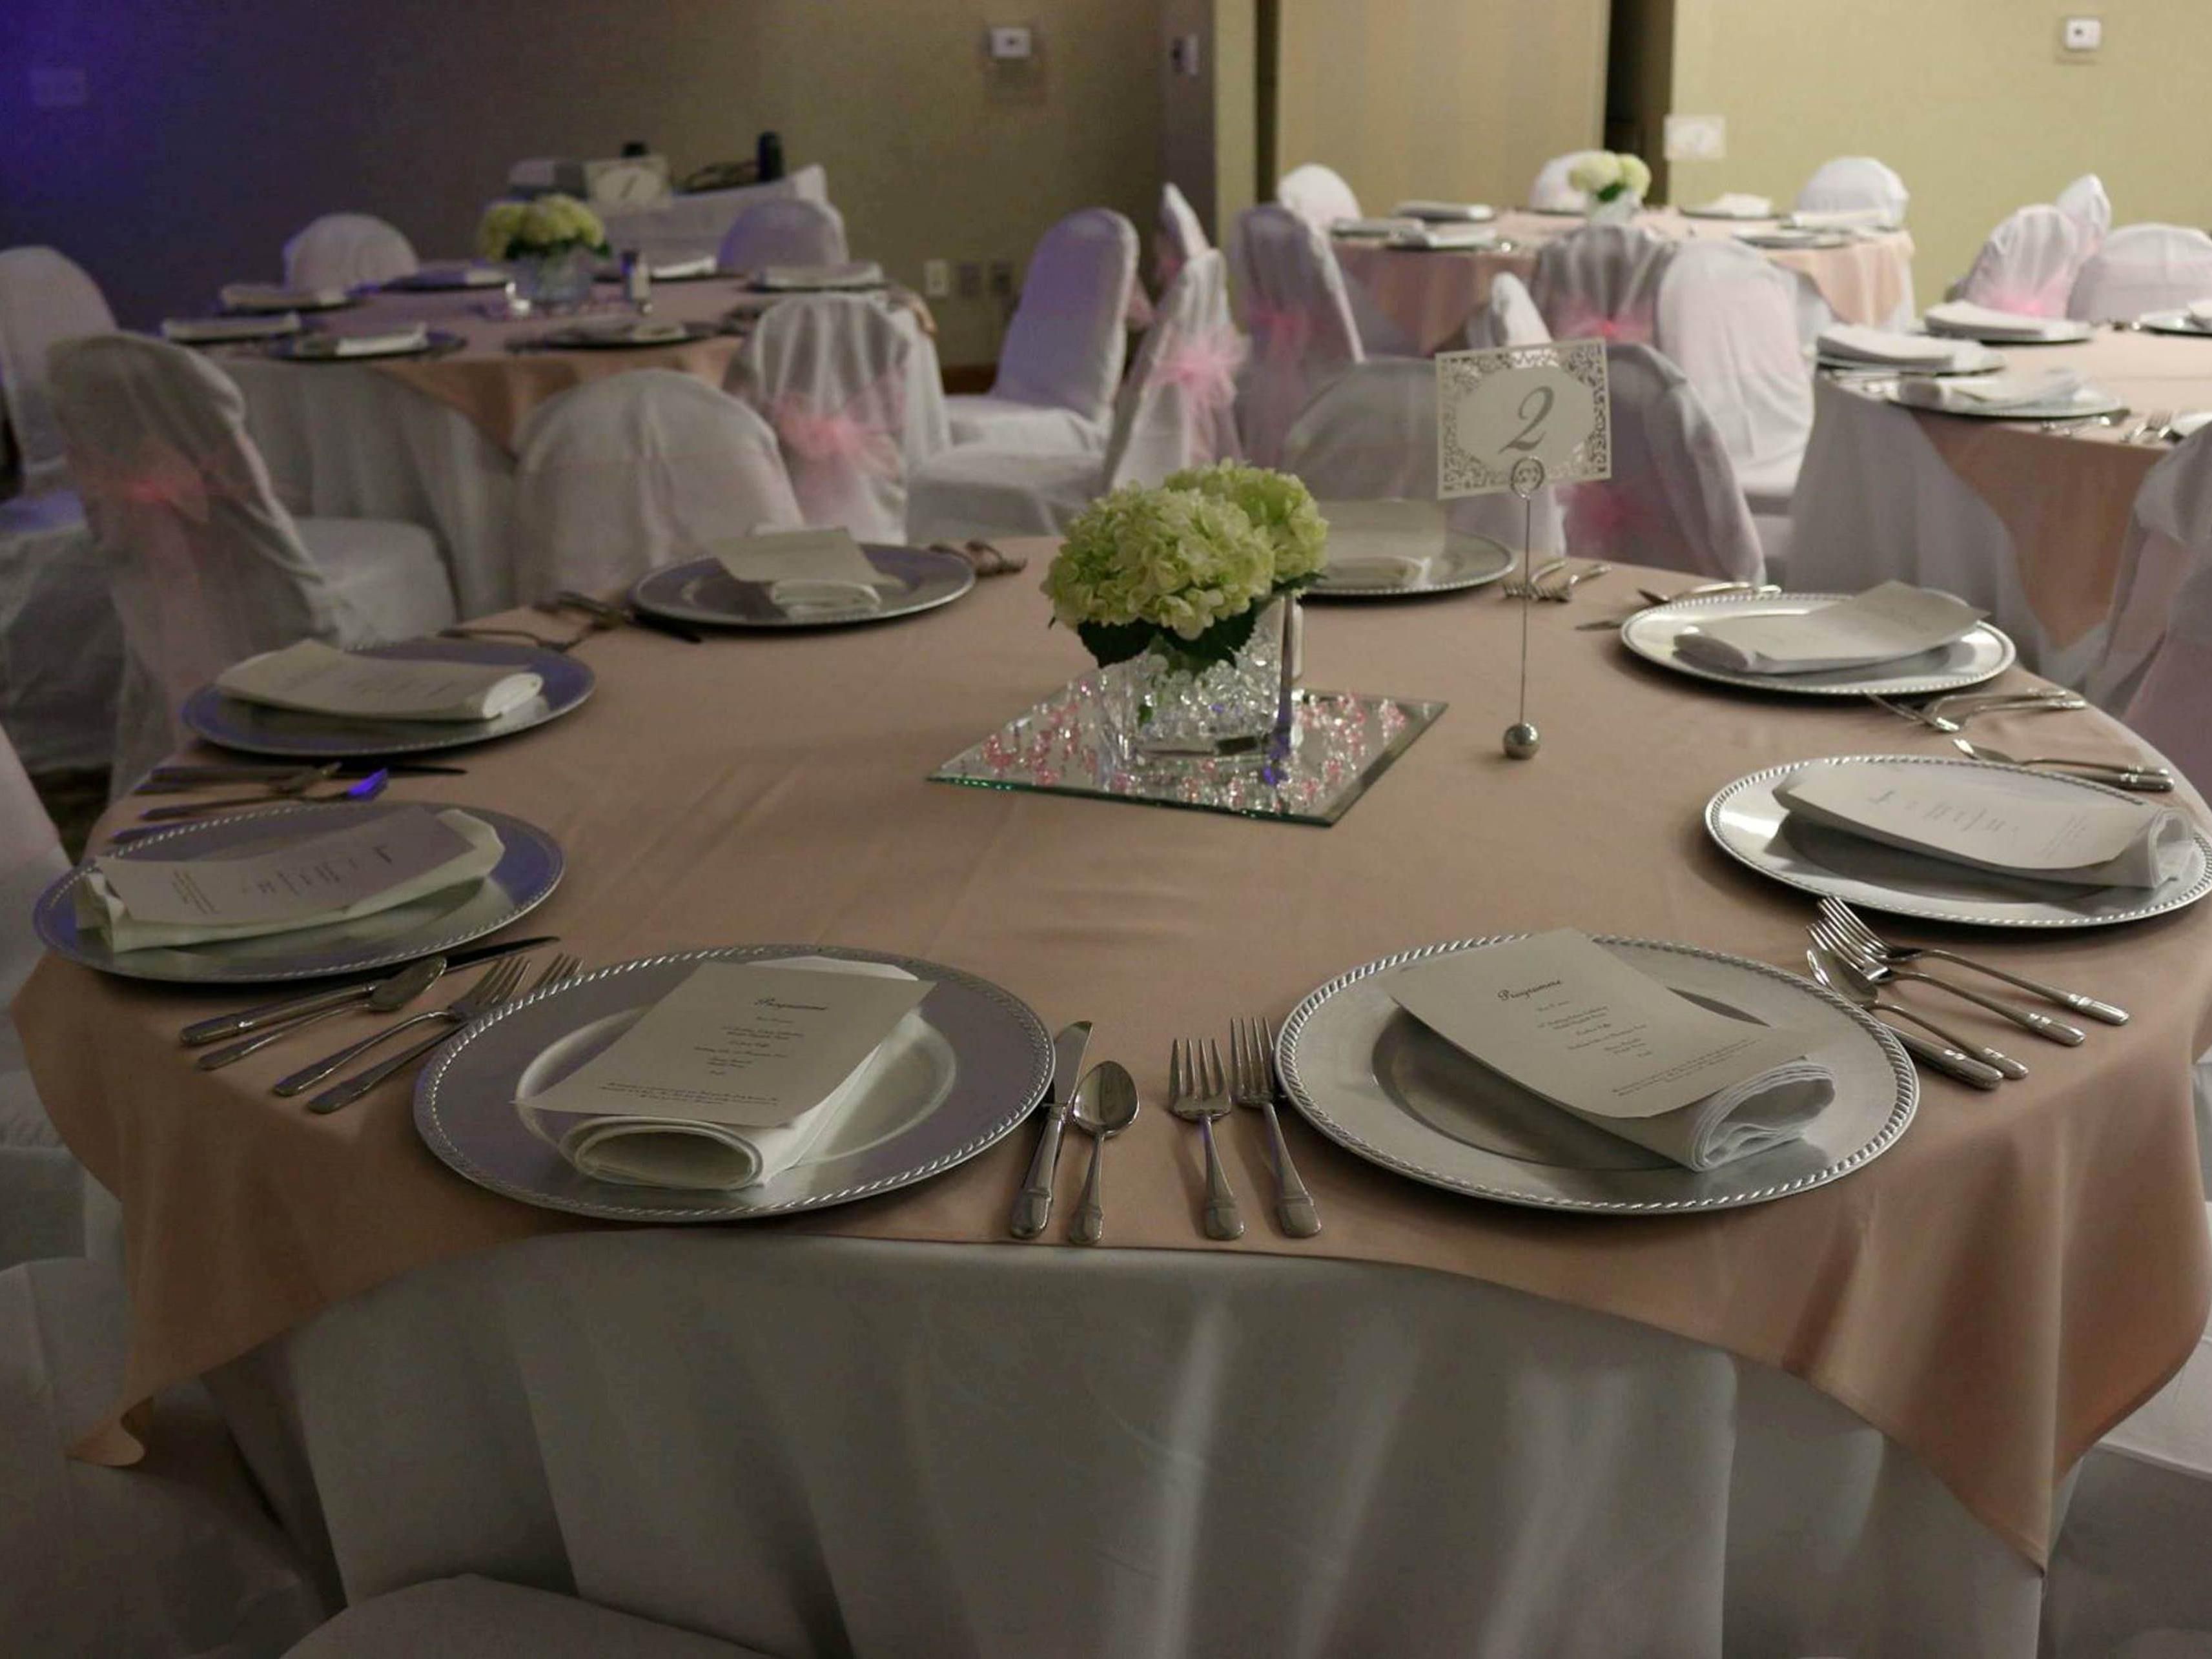 On-site catering services available for your next special occasion, meeting, or family event. Our ballroom will accommodate 90 people and our staff is dedicated to your complete satisfaction. Call us today!